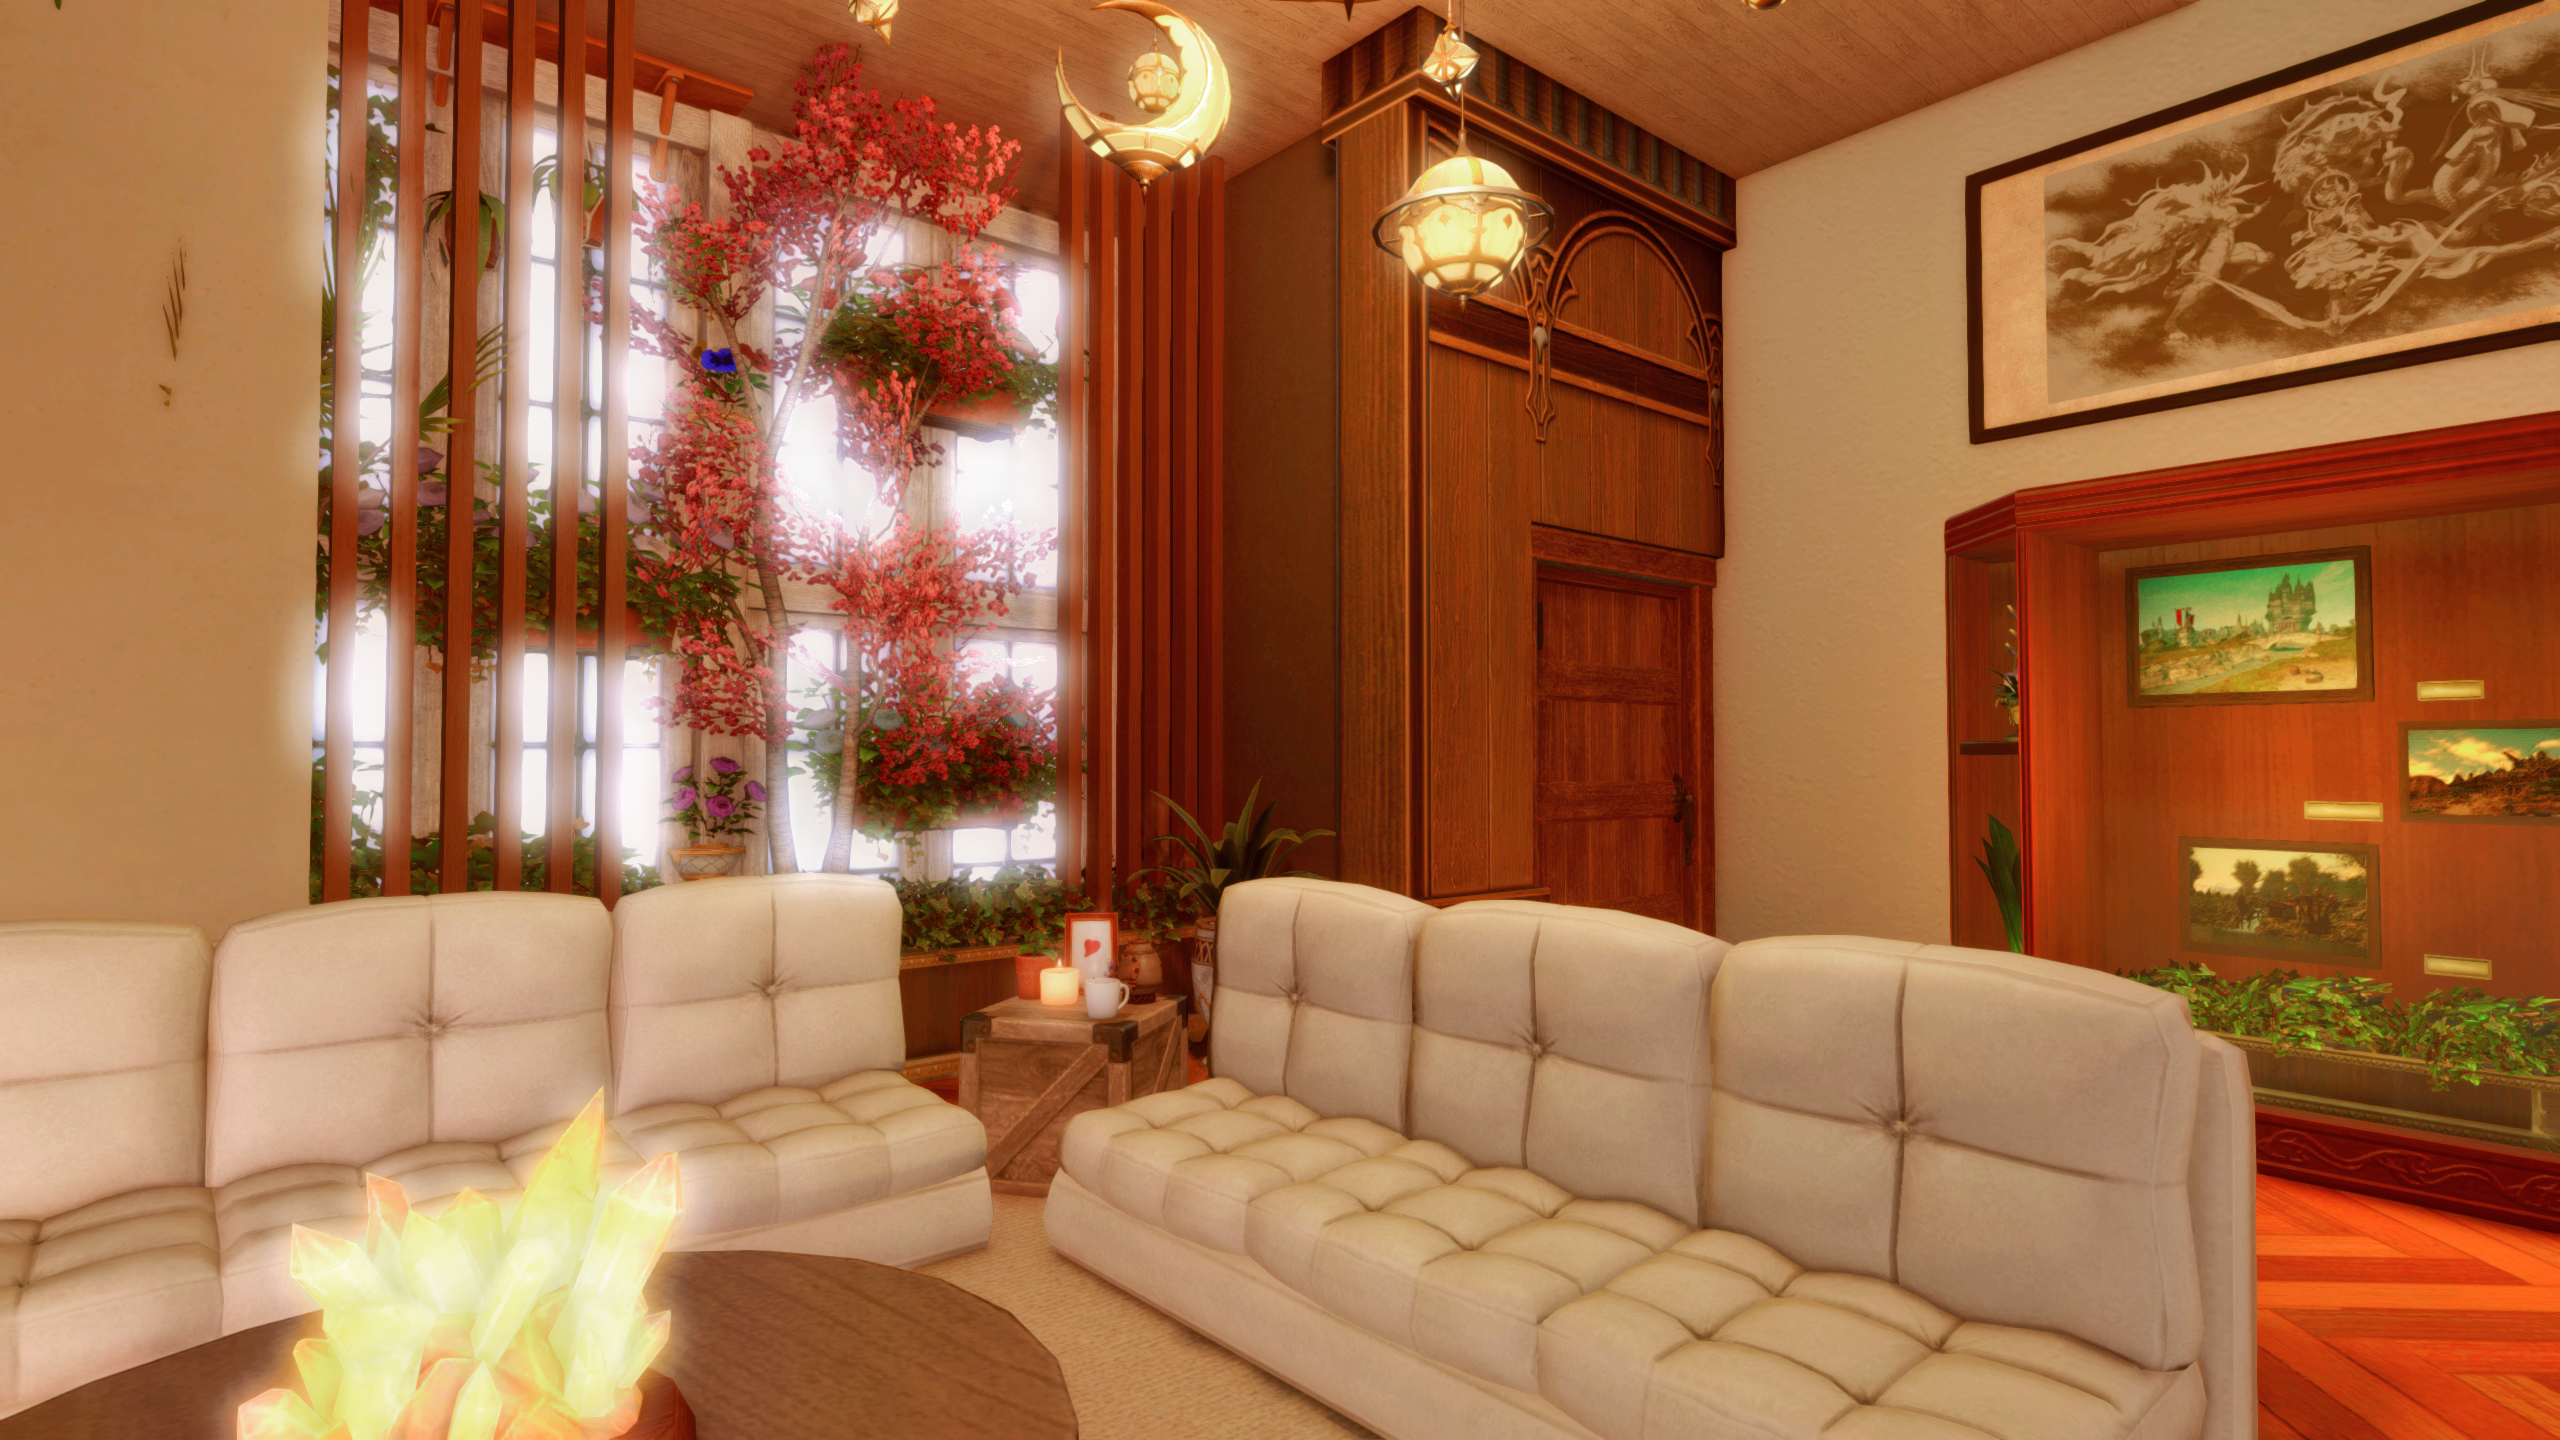 Final Fantasy 14 housing, living space with sofas, large windows and lots of plants